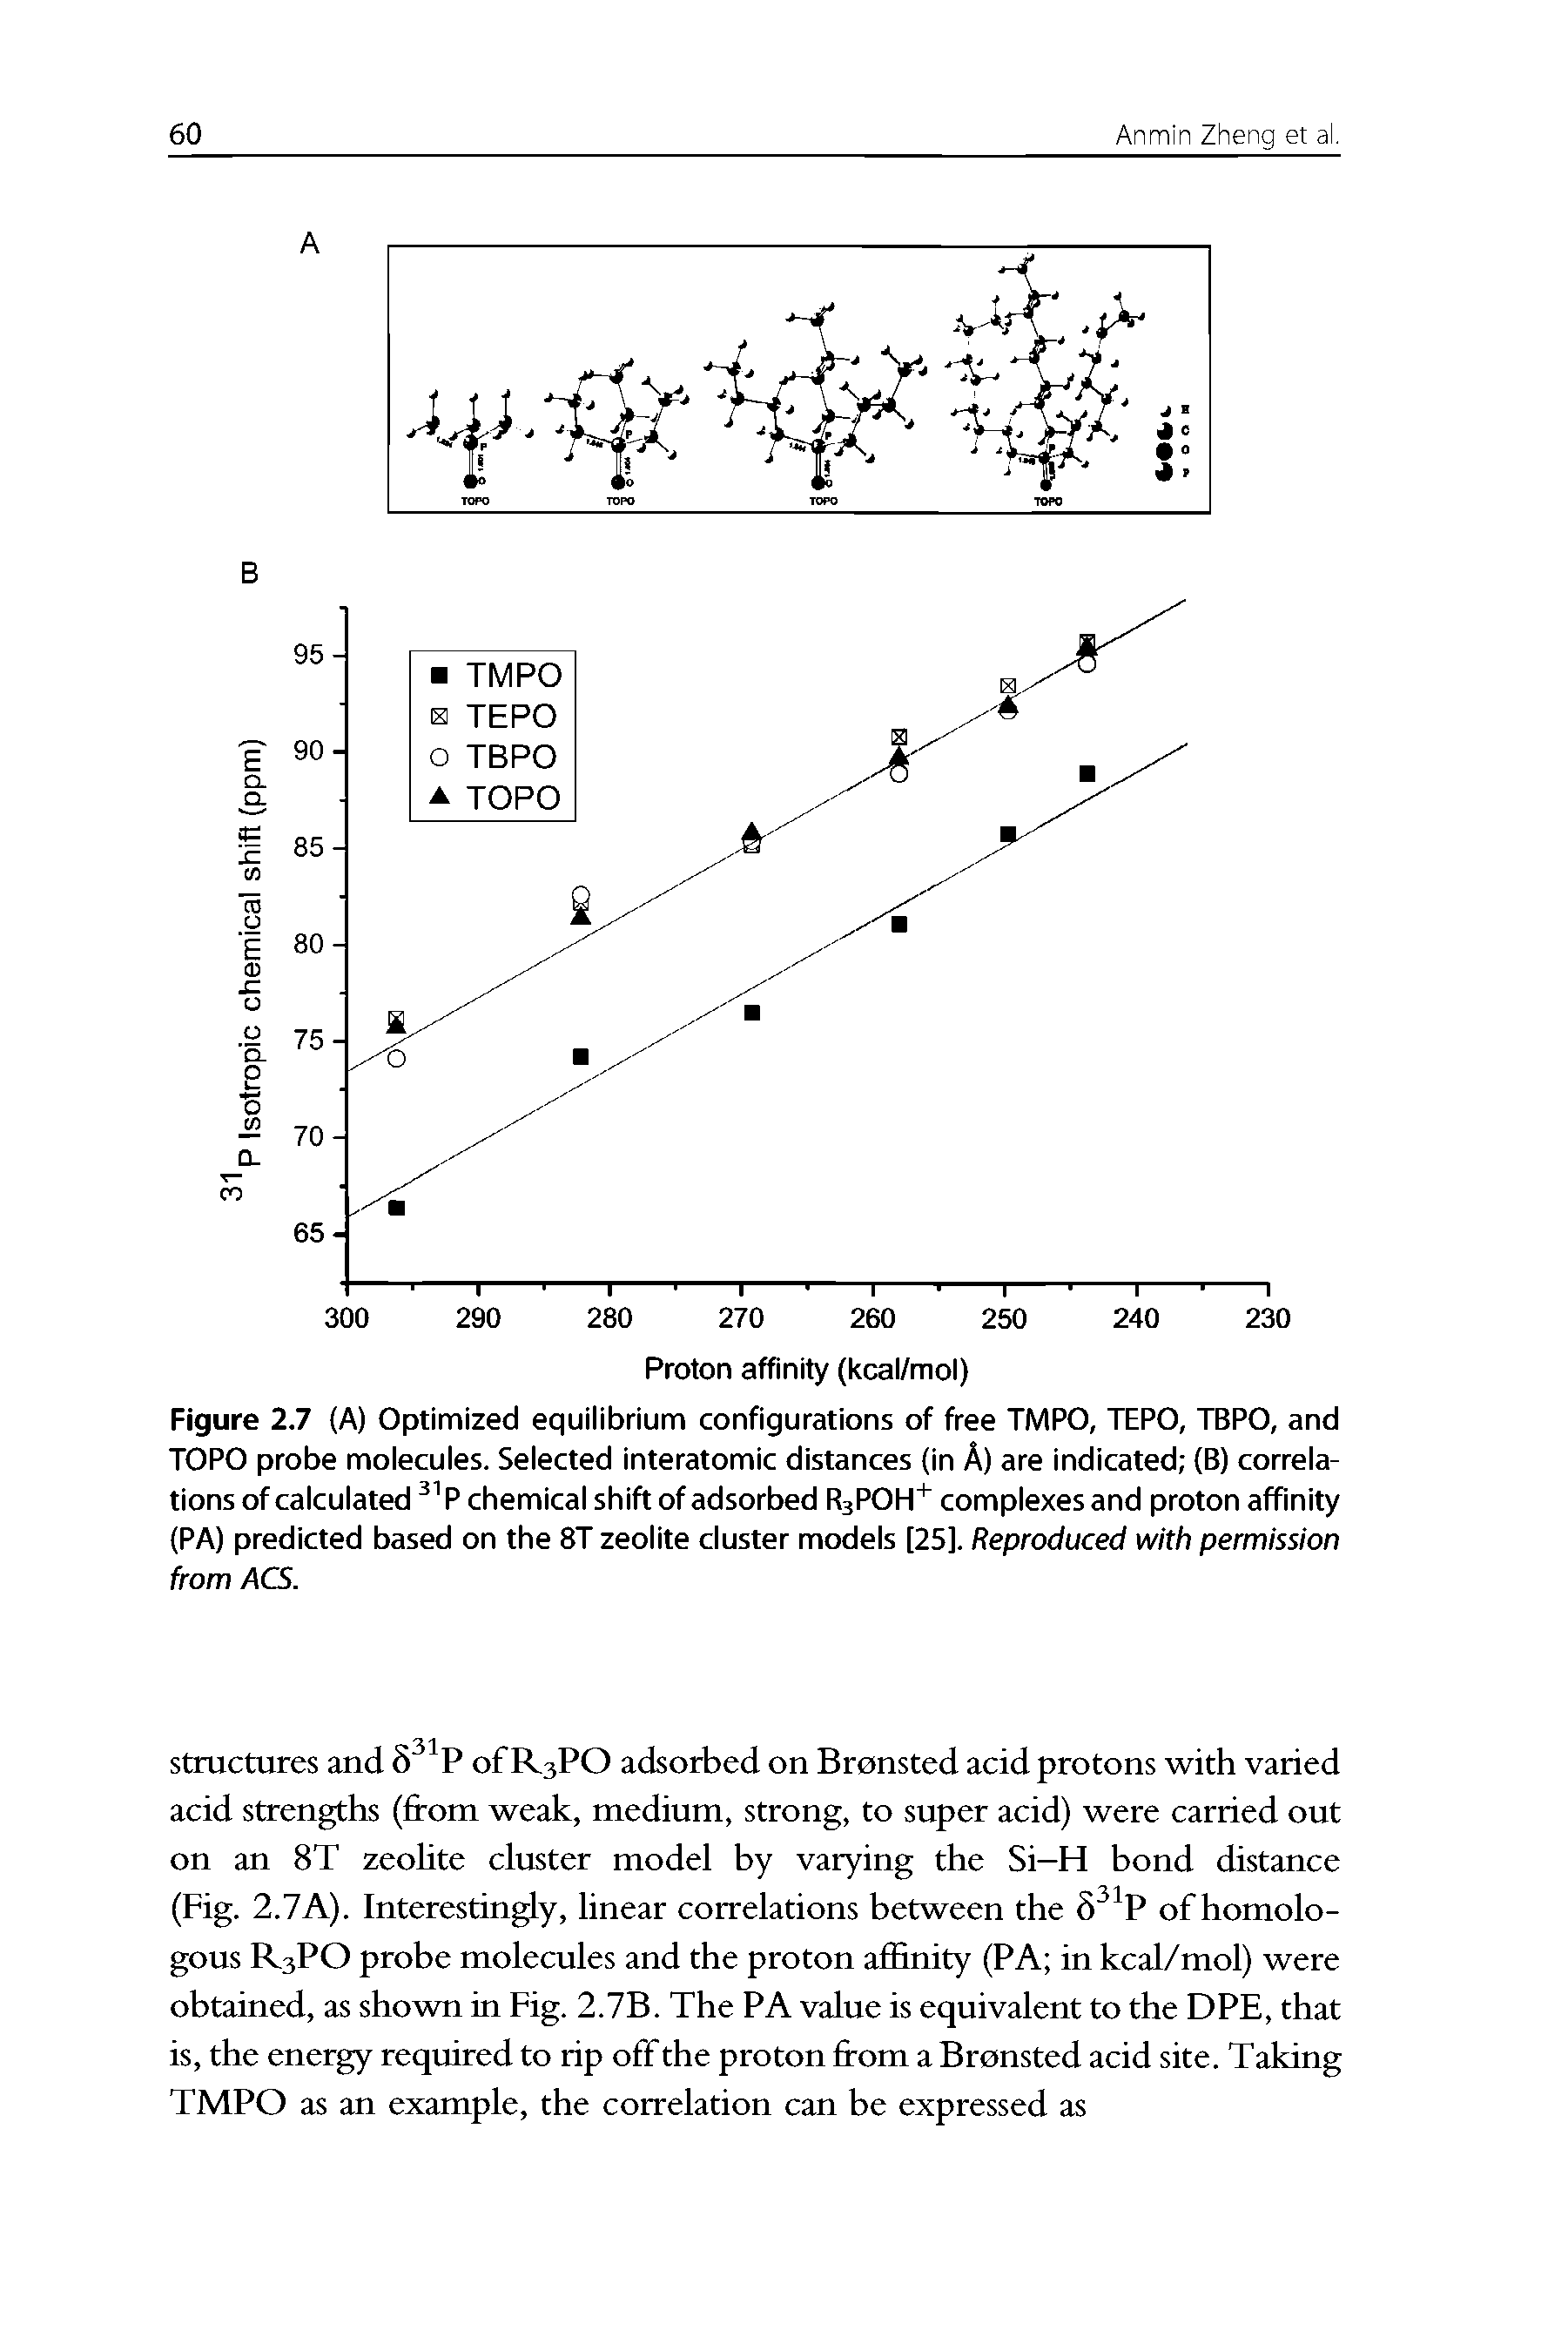 Figure 2.7 (A) Optimized equilibrium configurations of free TMPO, TEPO, TBPO, and TOPO probe molecules. Selected interatomic distances (in A) are indicated (B) correlations of calculated chemical shift of adsorbed RsPOH" complexes and proton affinity (PA) predicted based on the 8T zeolite cluster models [25]. Reproduced with permission from ACS.